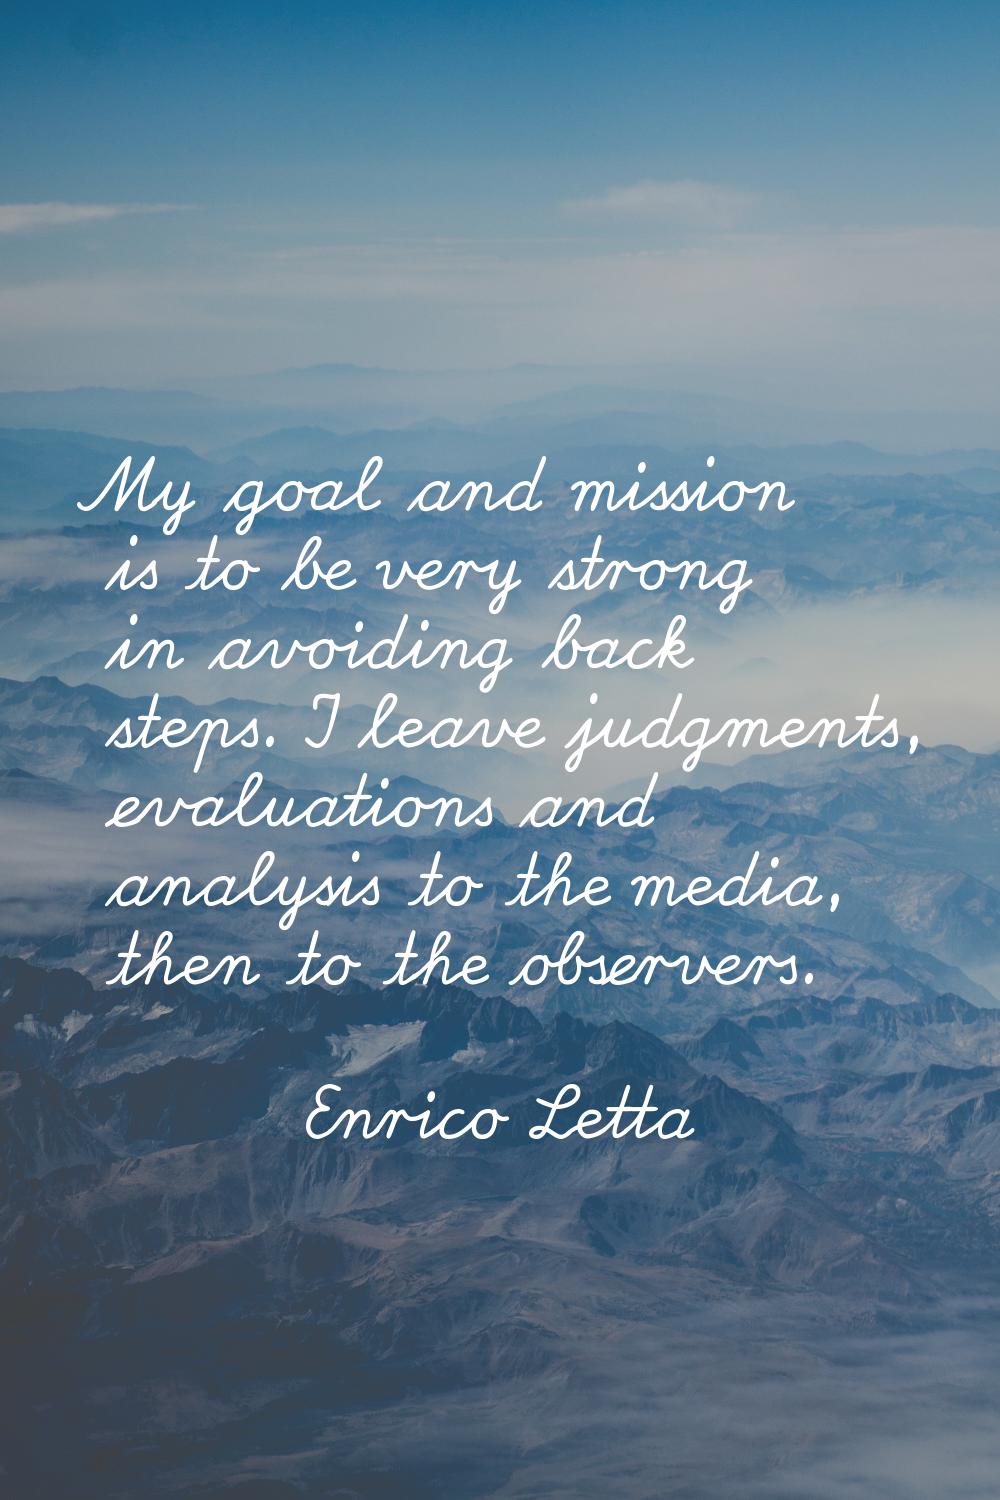 My goal and mission is to be very strong in avoiding back steps. I leave judgments, evaluations and